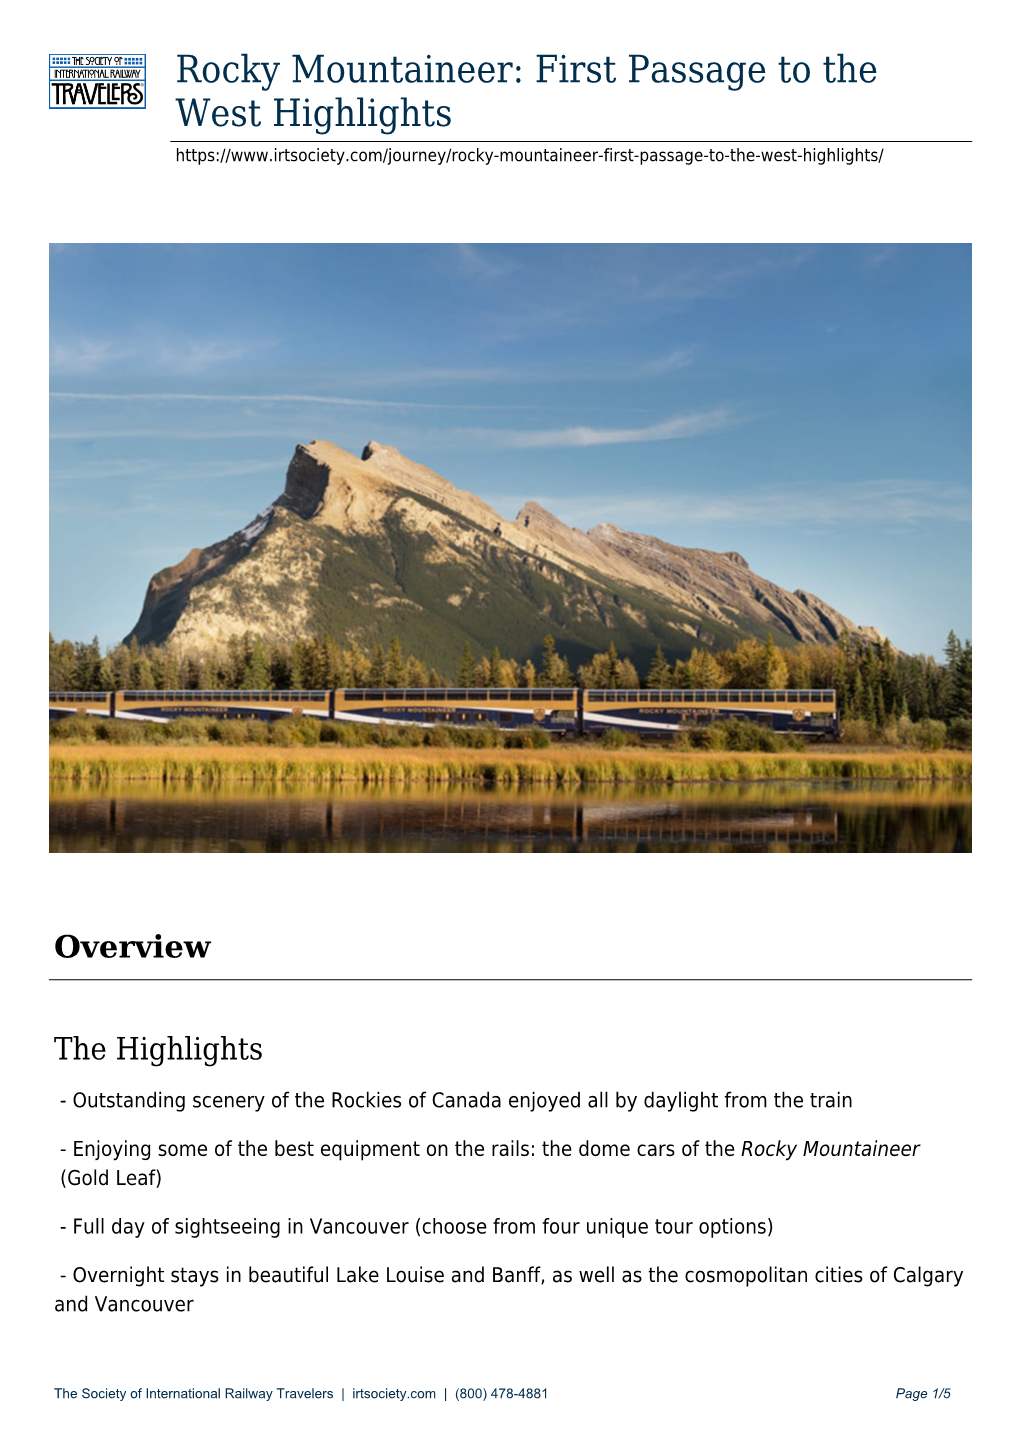 Rocky Mountaineer: First Passage to the West Highlights